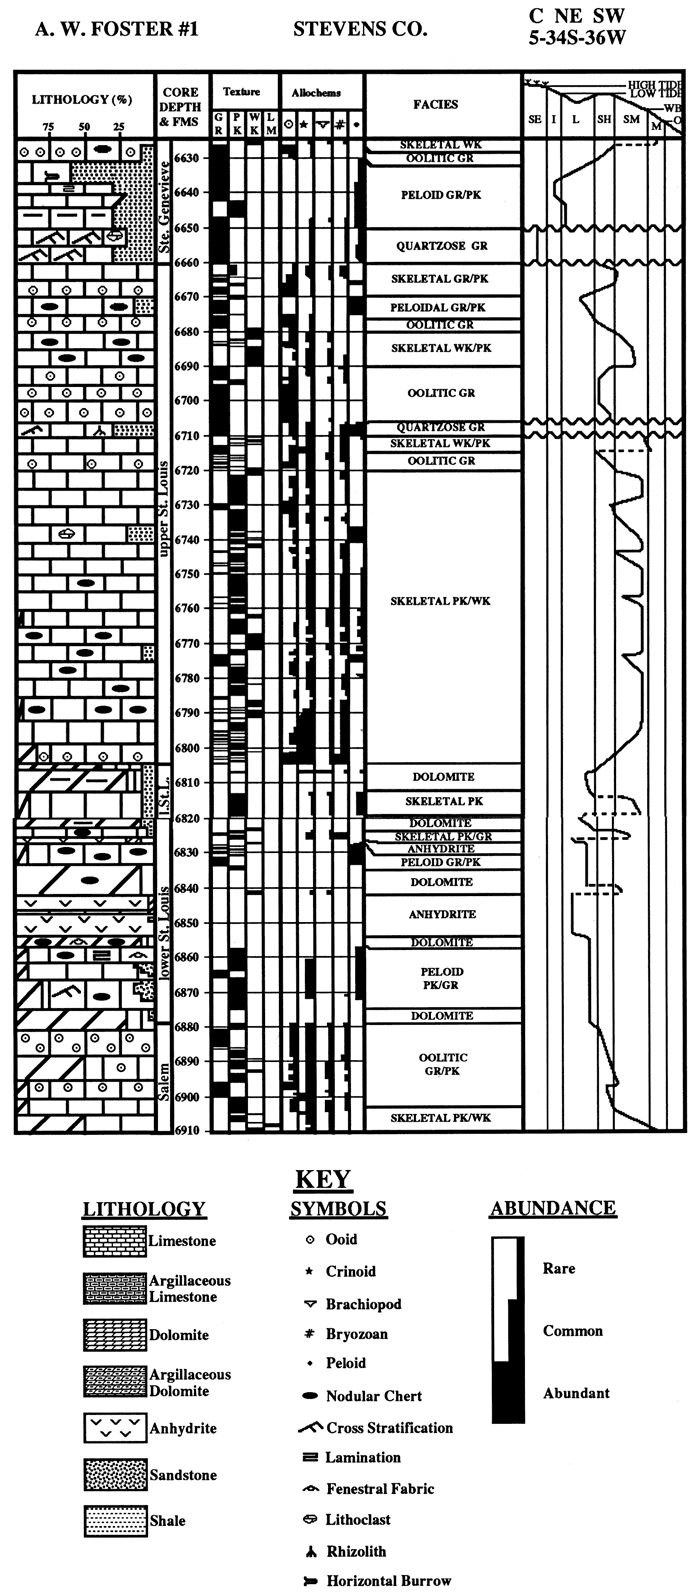 Lithology, texture, allochems, facies, and depositional environments of Mobil No. 1 Foster.